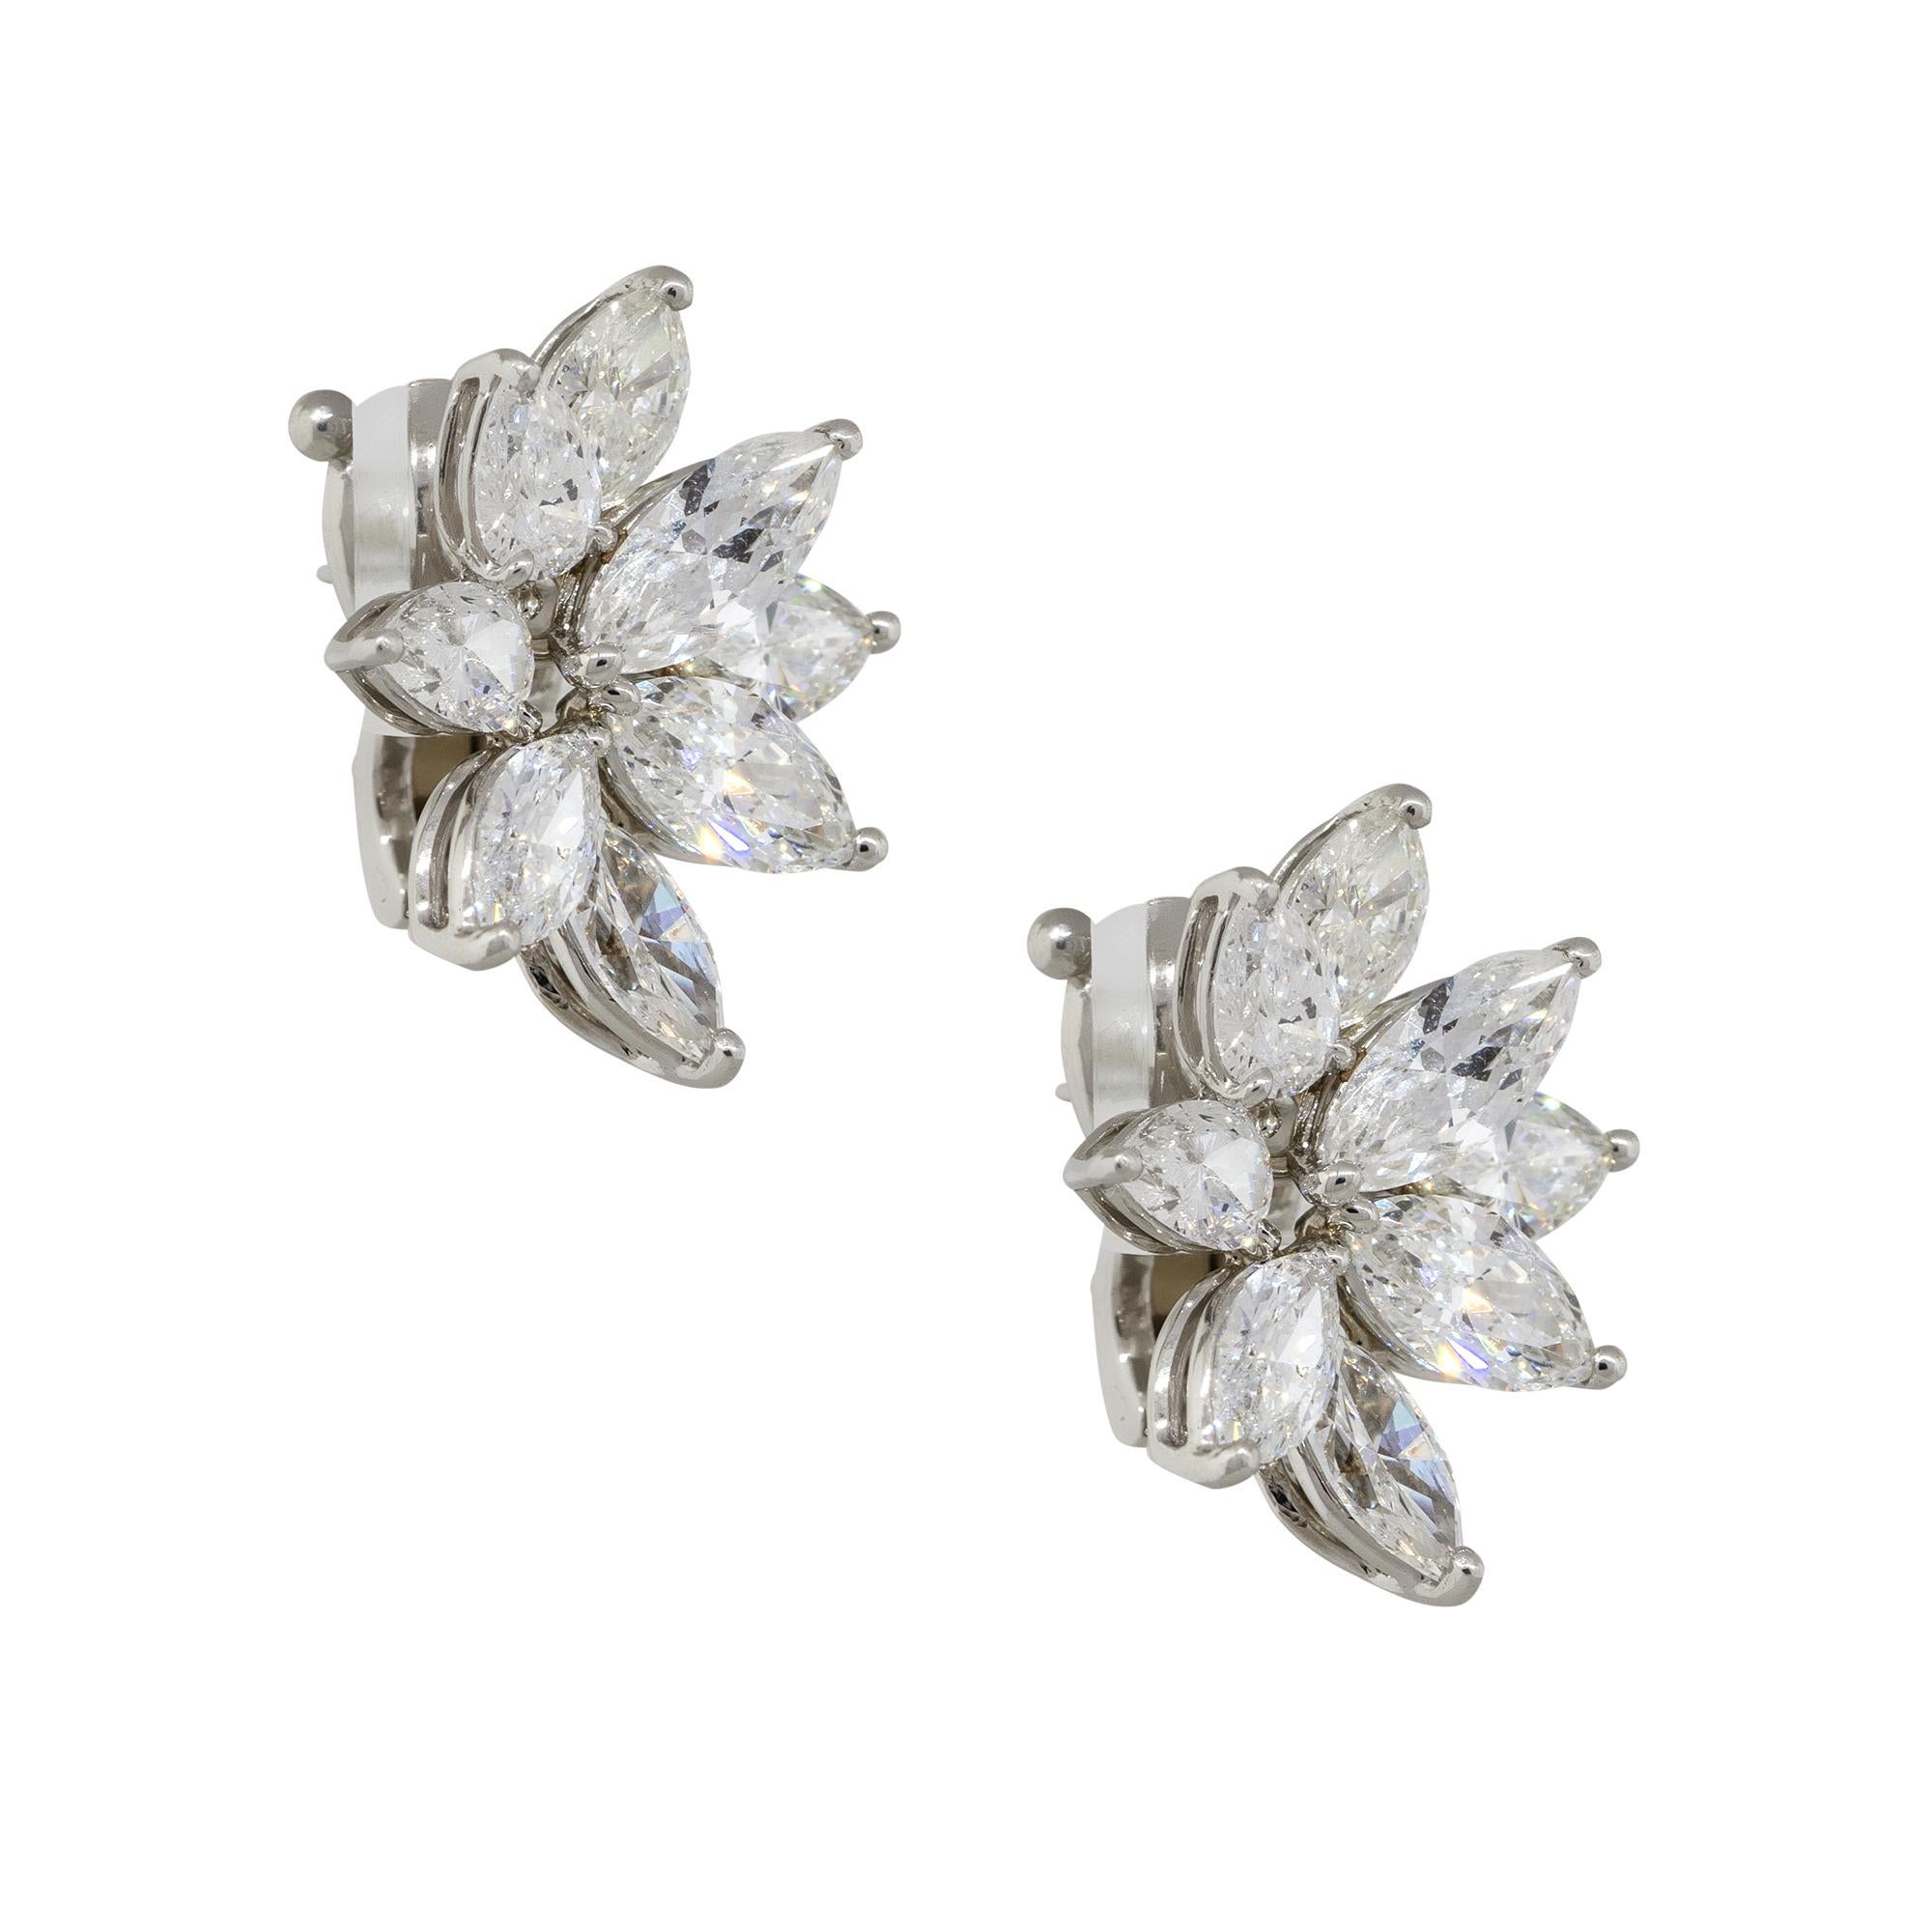 Material: Platinum
Diamond Details: Approx. 8.70ctw of marquise and pear shaped Diamonds. Diamonds are F/G in color and VS-SI in clarity
Earring Measurements: 18.70mm x 16.60mm x 22.20mm
Total Weight: 14.1g (9.1dwt) 
Earring backs: Omega